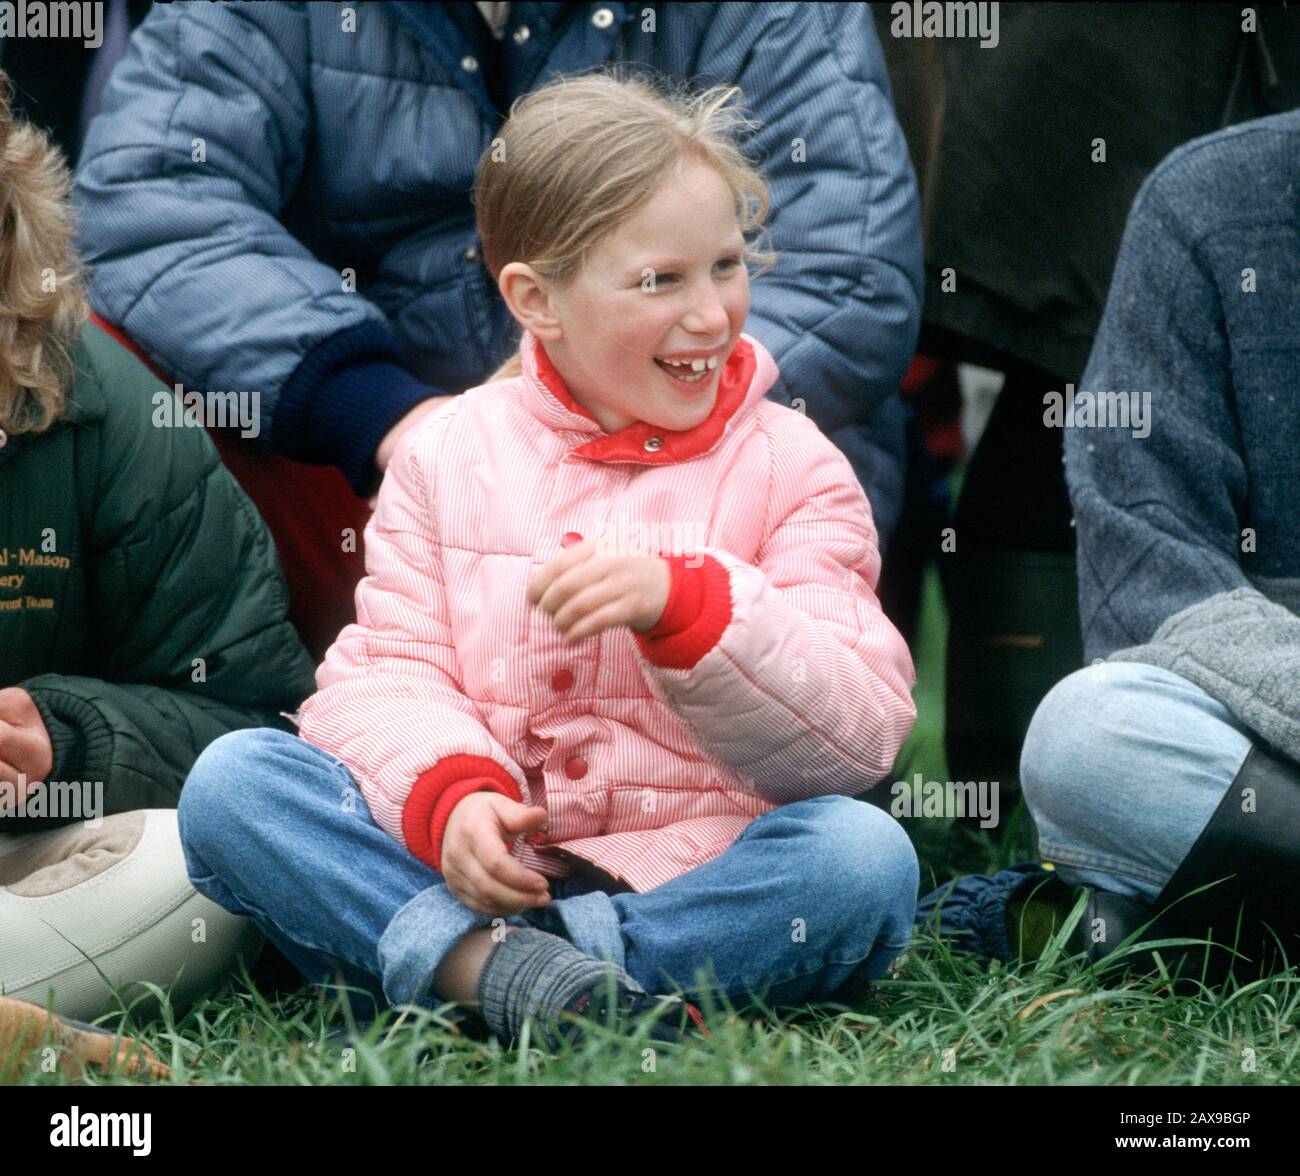 Zara Phillips at The Stoneaston Park Horse Trials, England, March 1989 Stock Photo